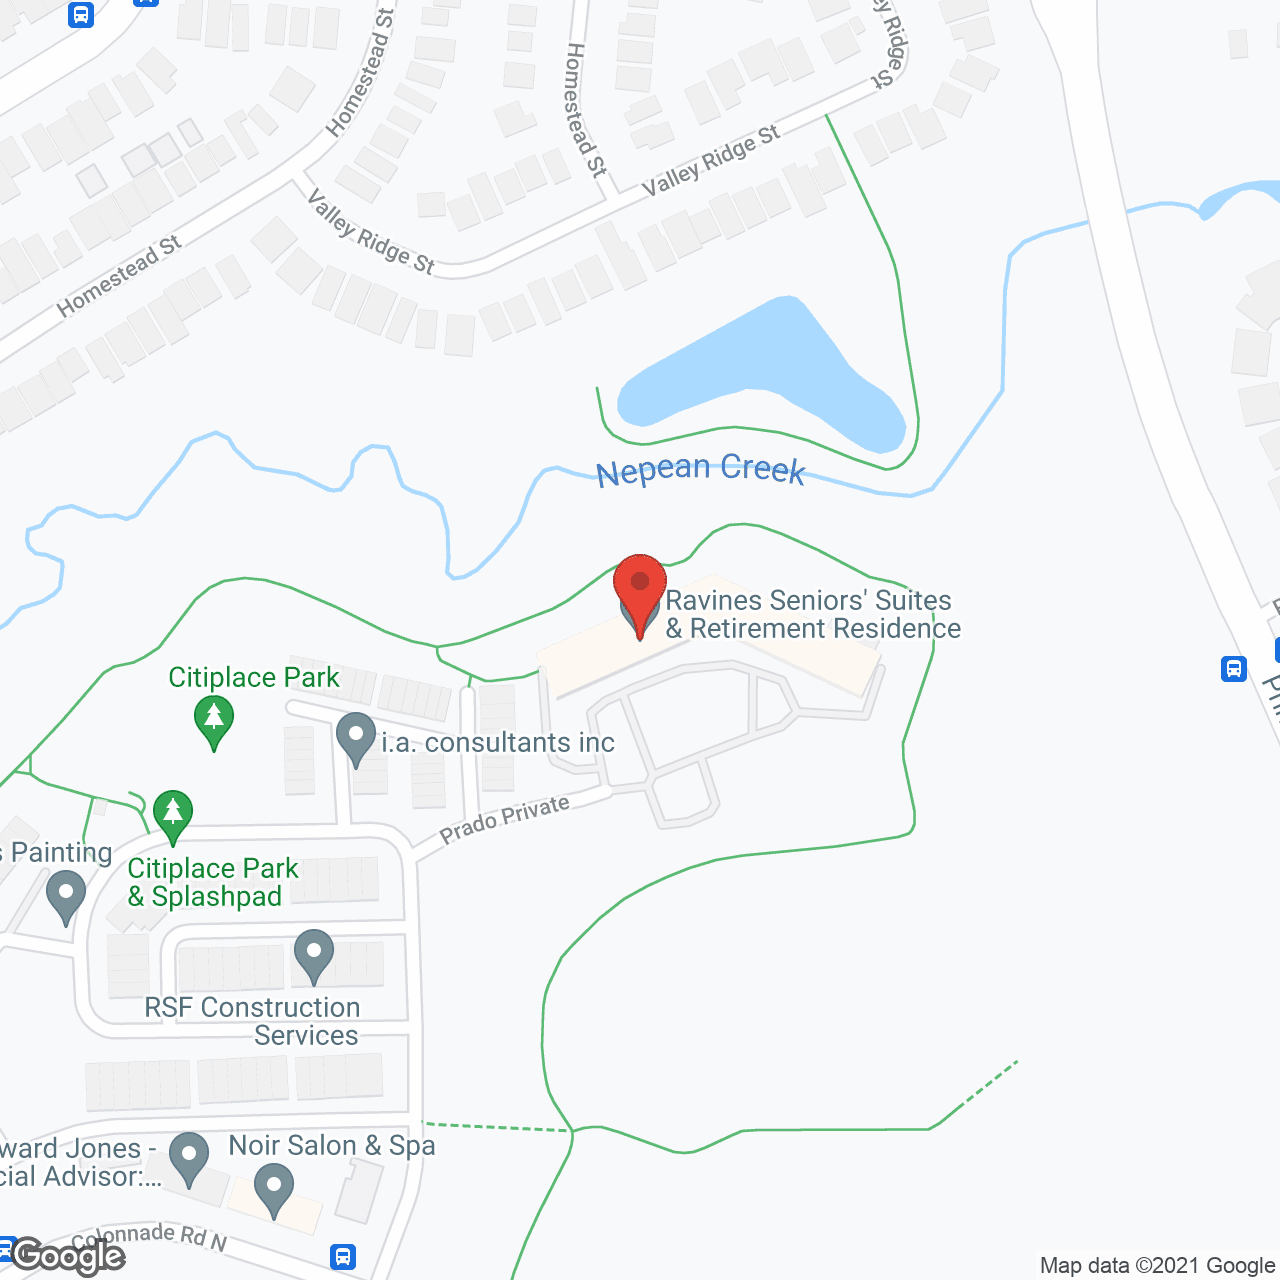 The Ravines Seniors' Suites and Retirement Residence in google map